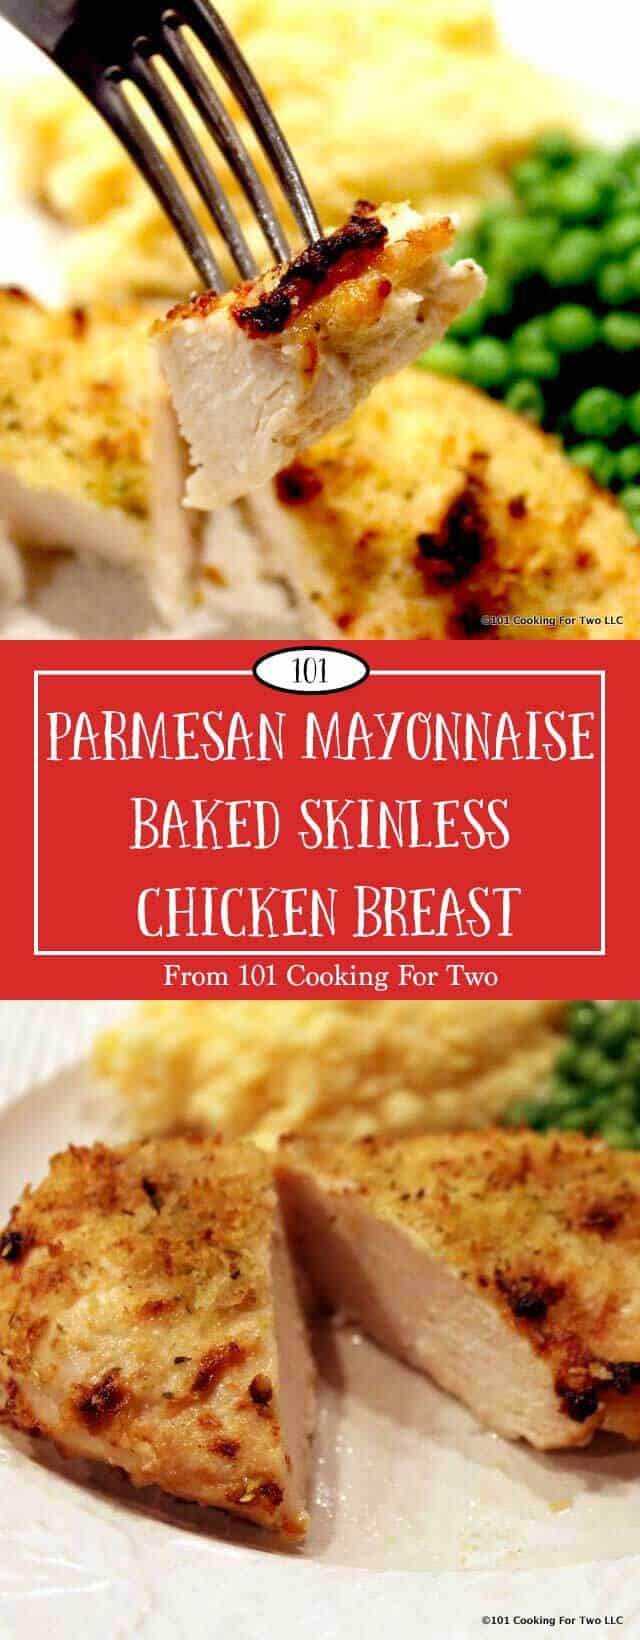 Mayonnaise Baked Chicken
 Parmesan Mayonnaise Baked Skinless Chicken Breast